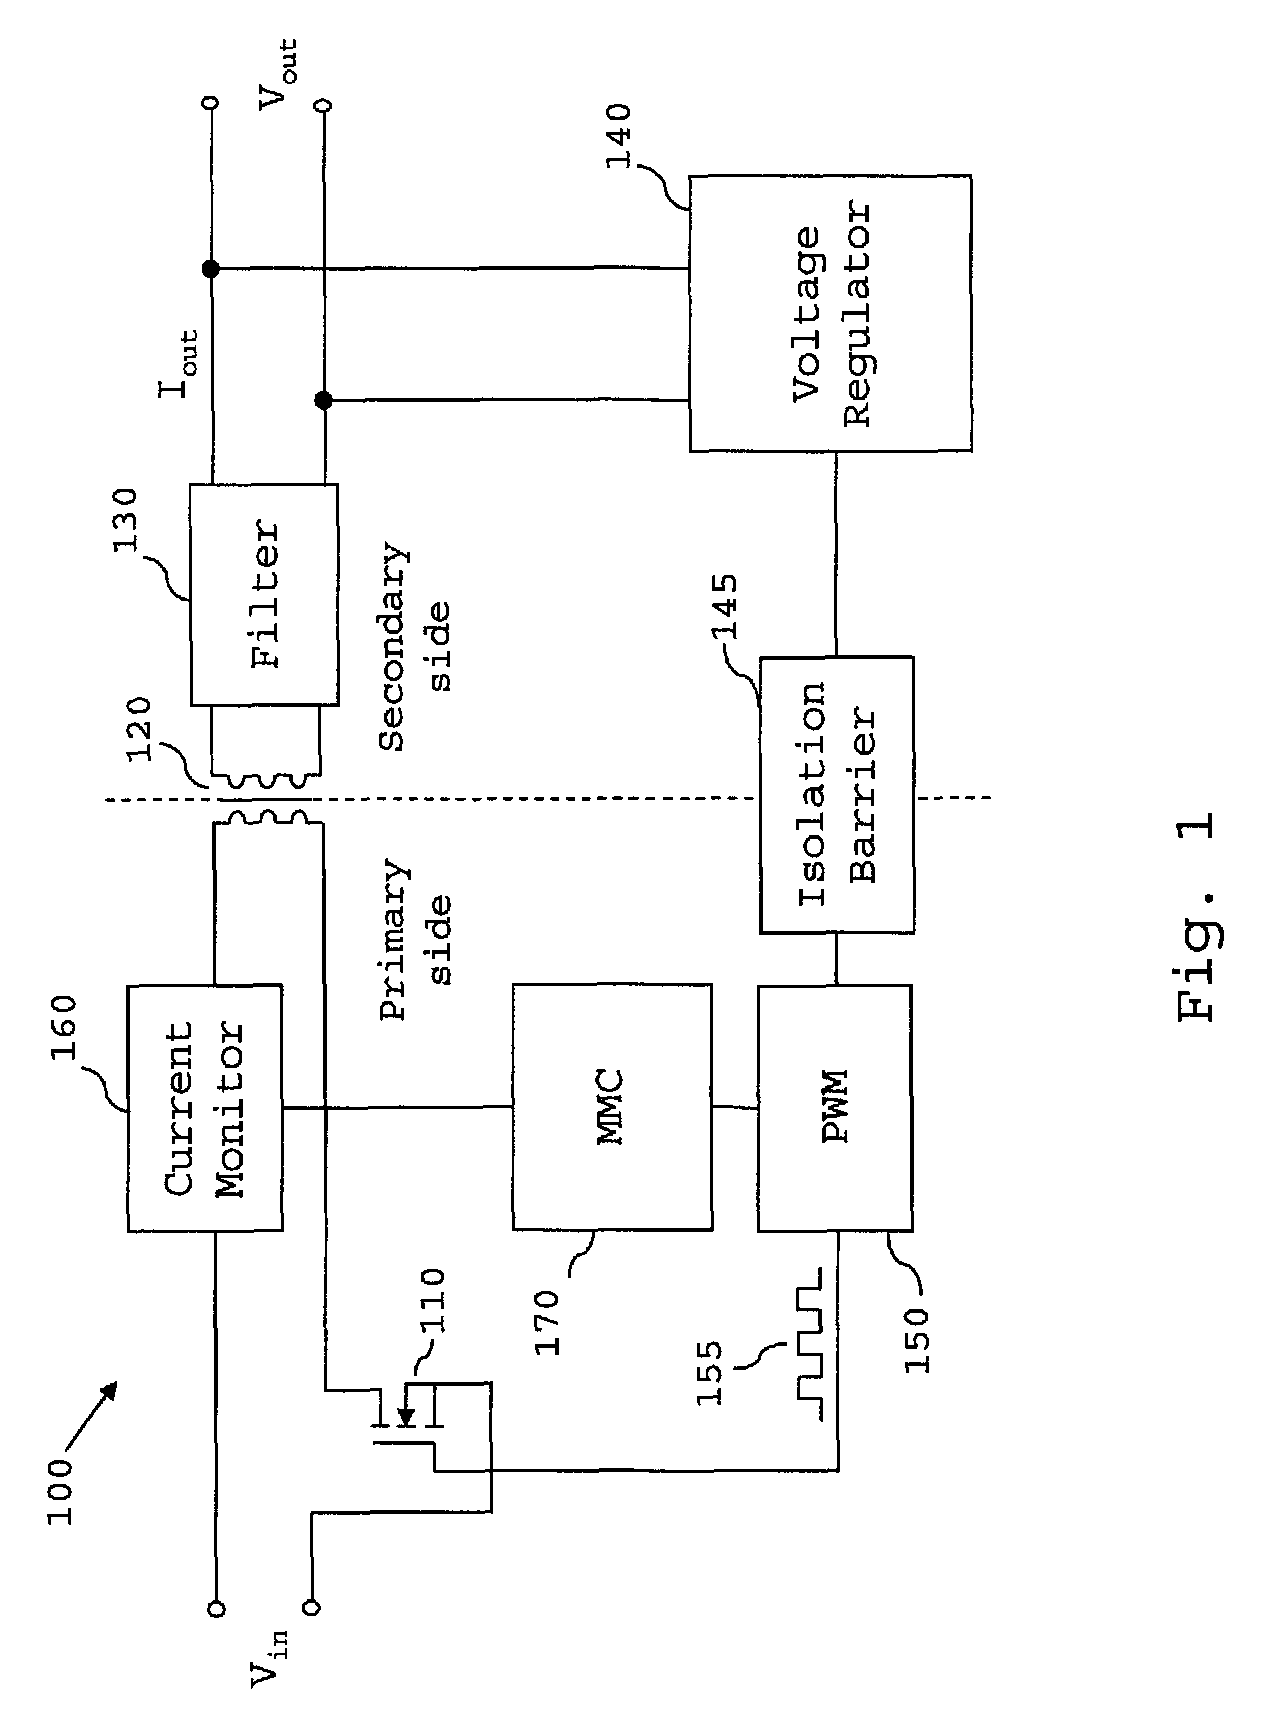 Overload detection in a switched mode power supply